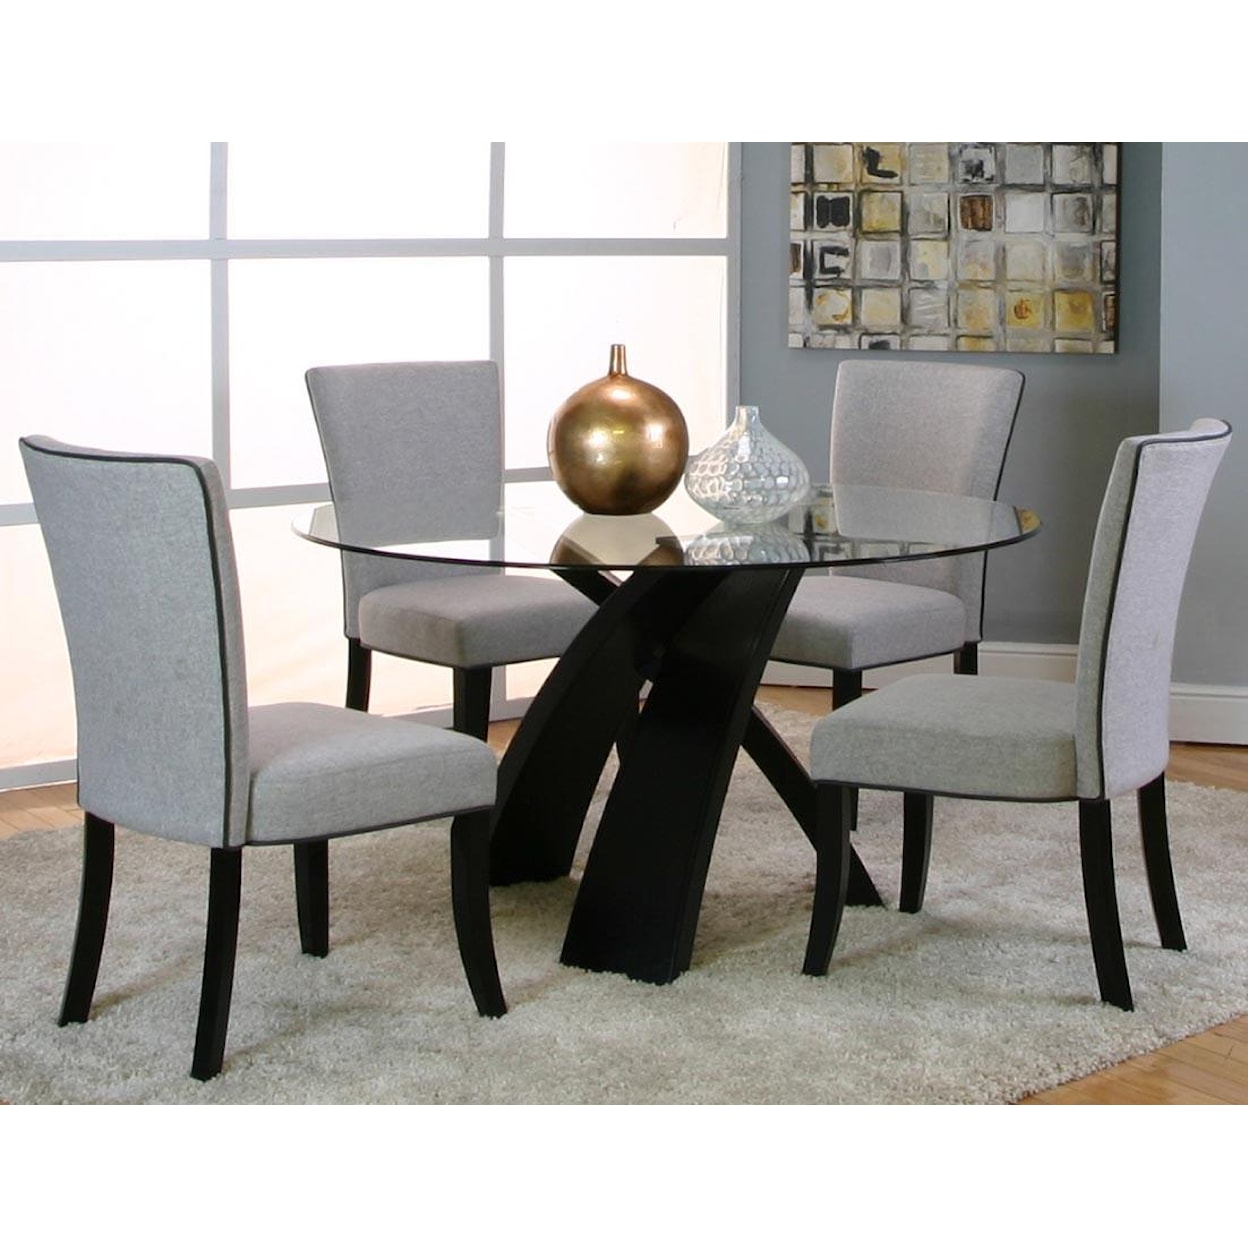 Cramco, Inc Sumner 25699 5 Piece Dining Table